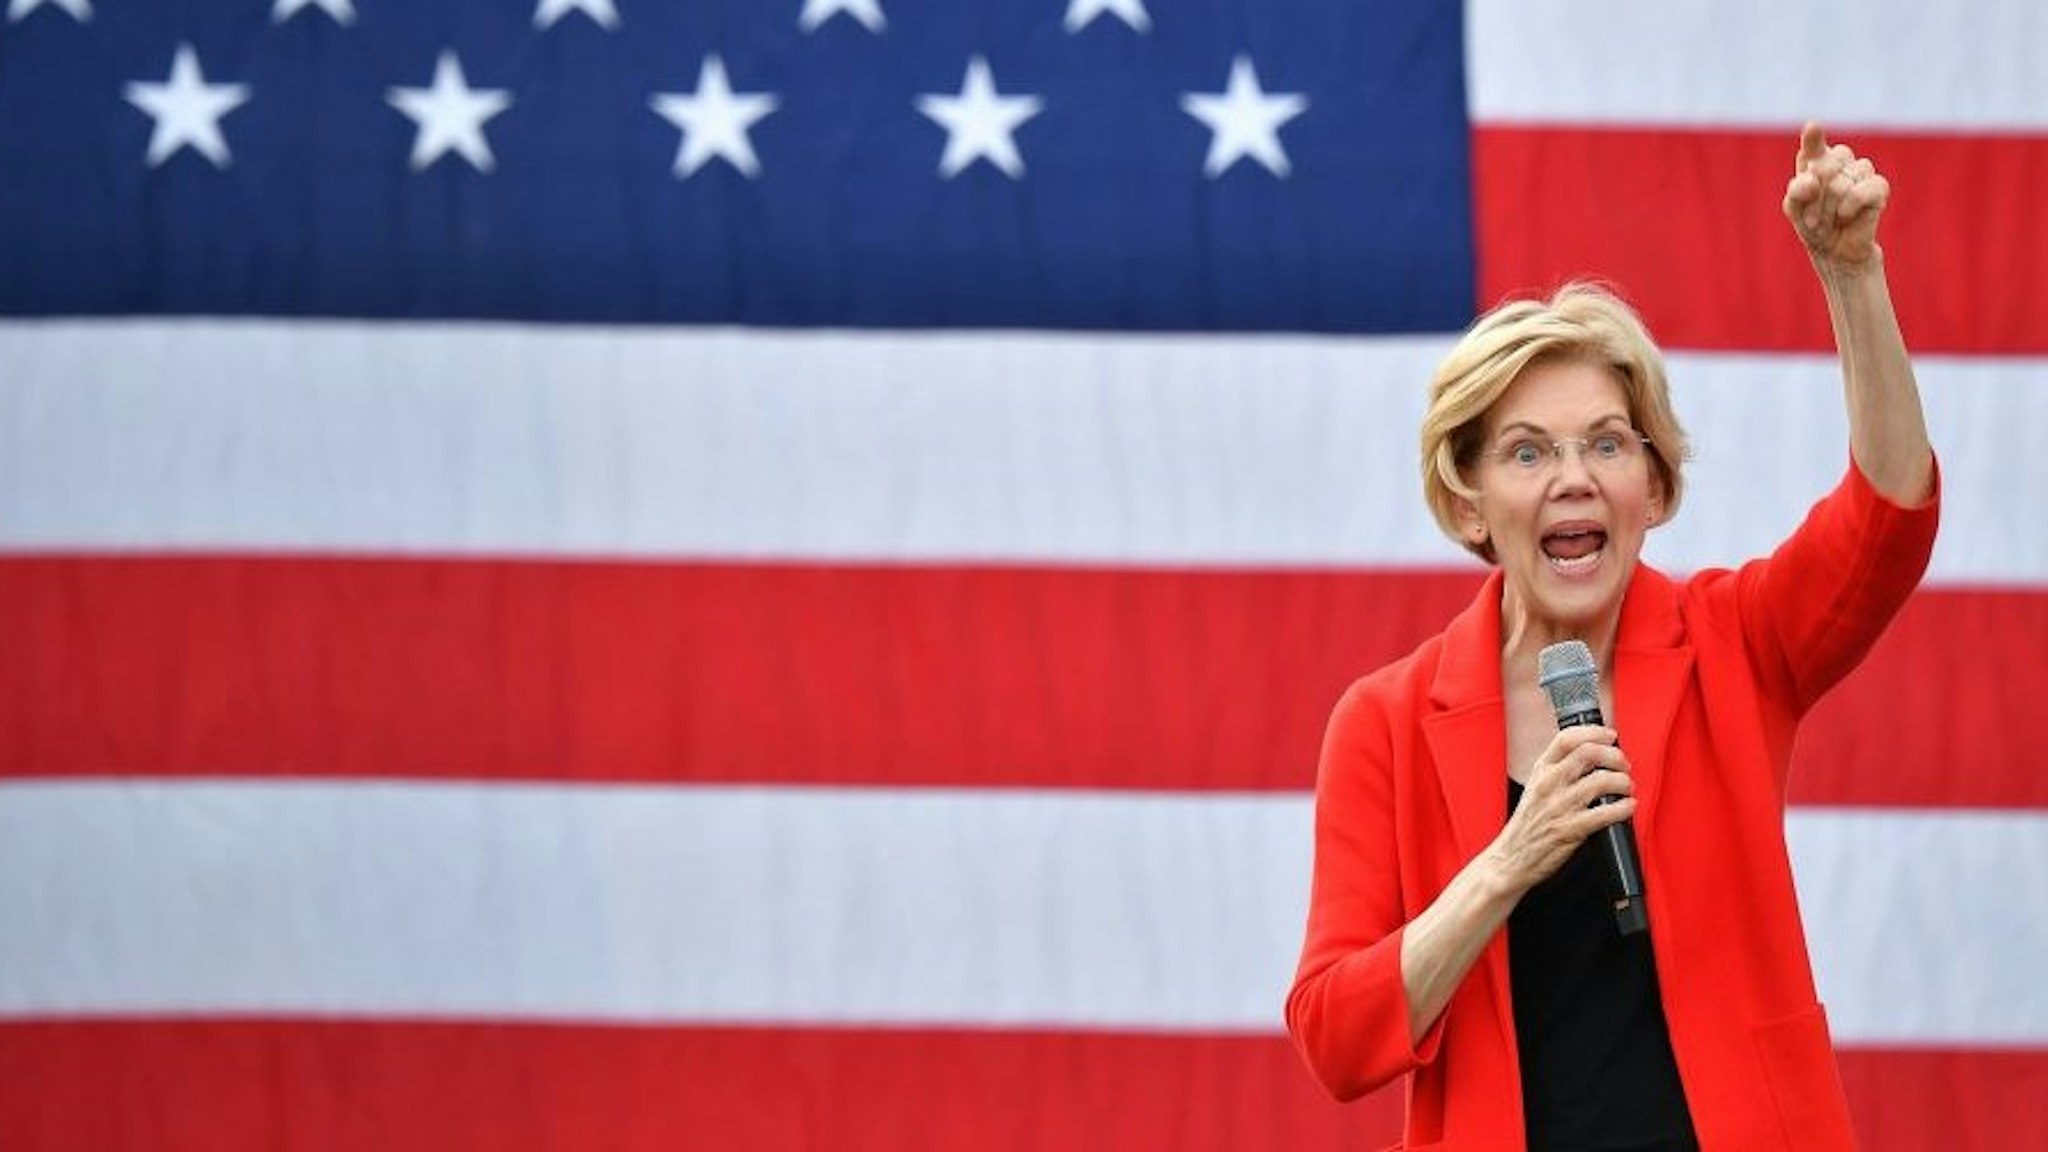 TOPSHOT - Democratic presidential candidate Elizabeth Warren gestures as she speaks during a campaign stop at George Mason University in Fairfax, Virginia on May 16, 2019.